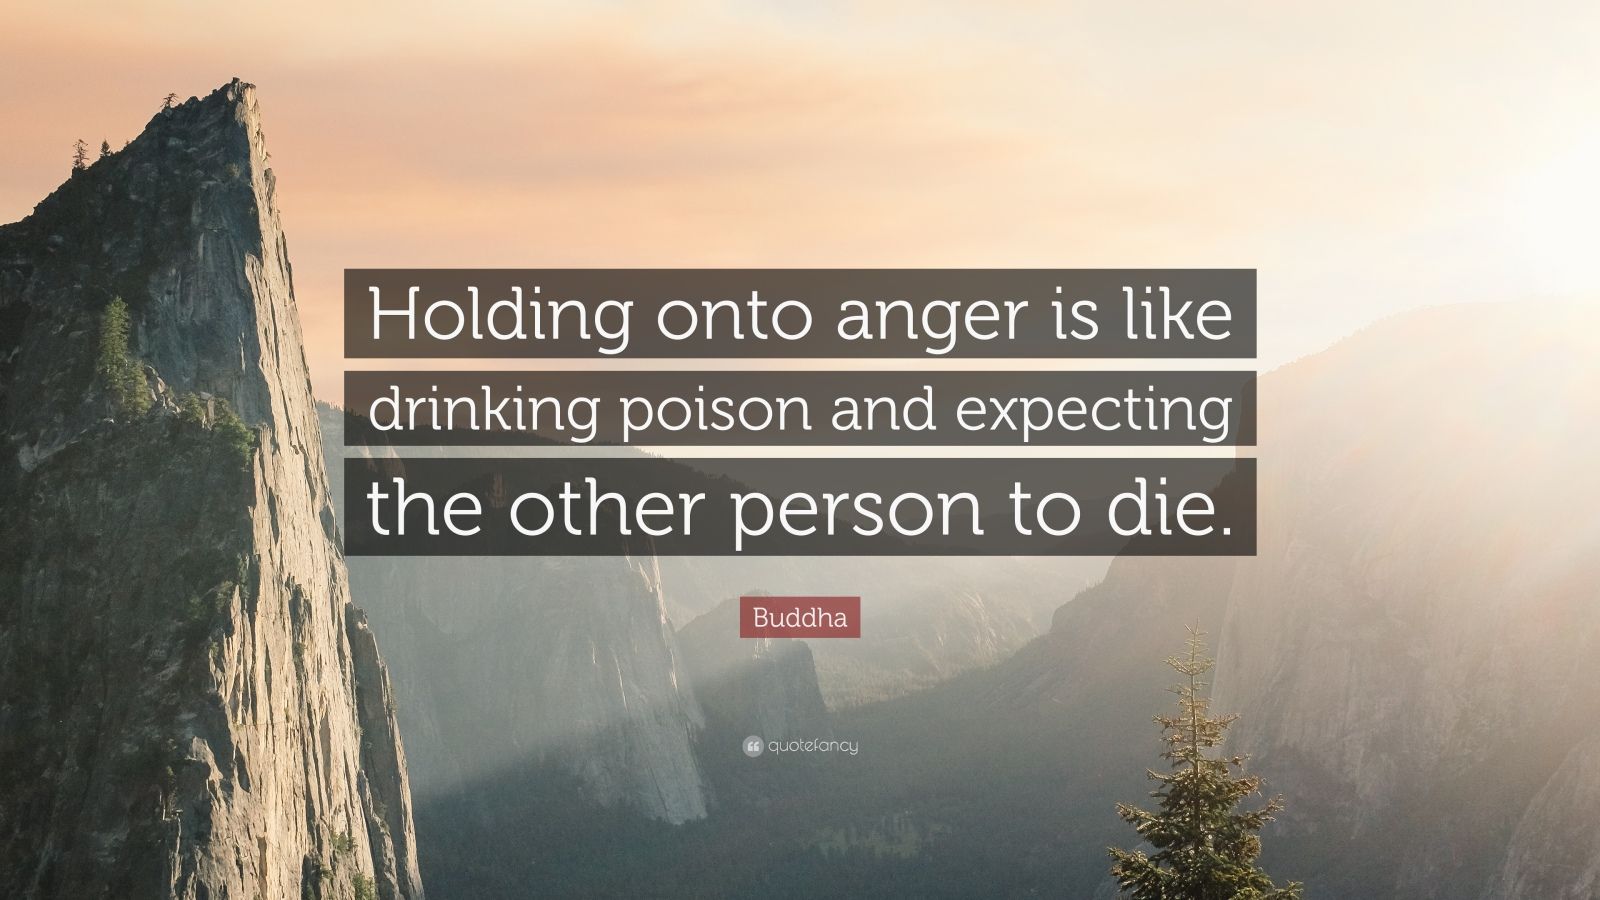 Buddha Quote: “Holding onto anger is like drinking poison and expecting